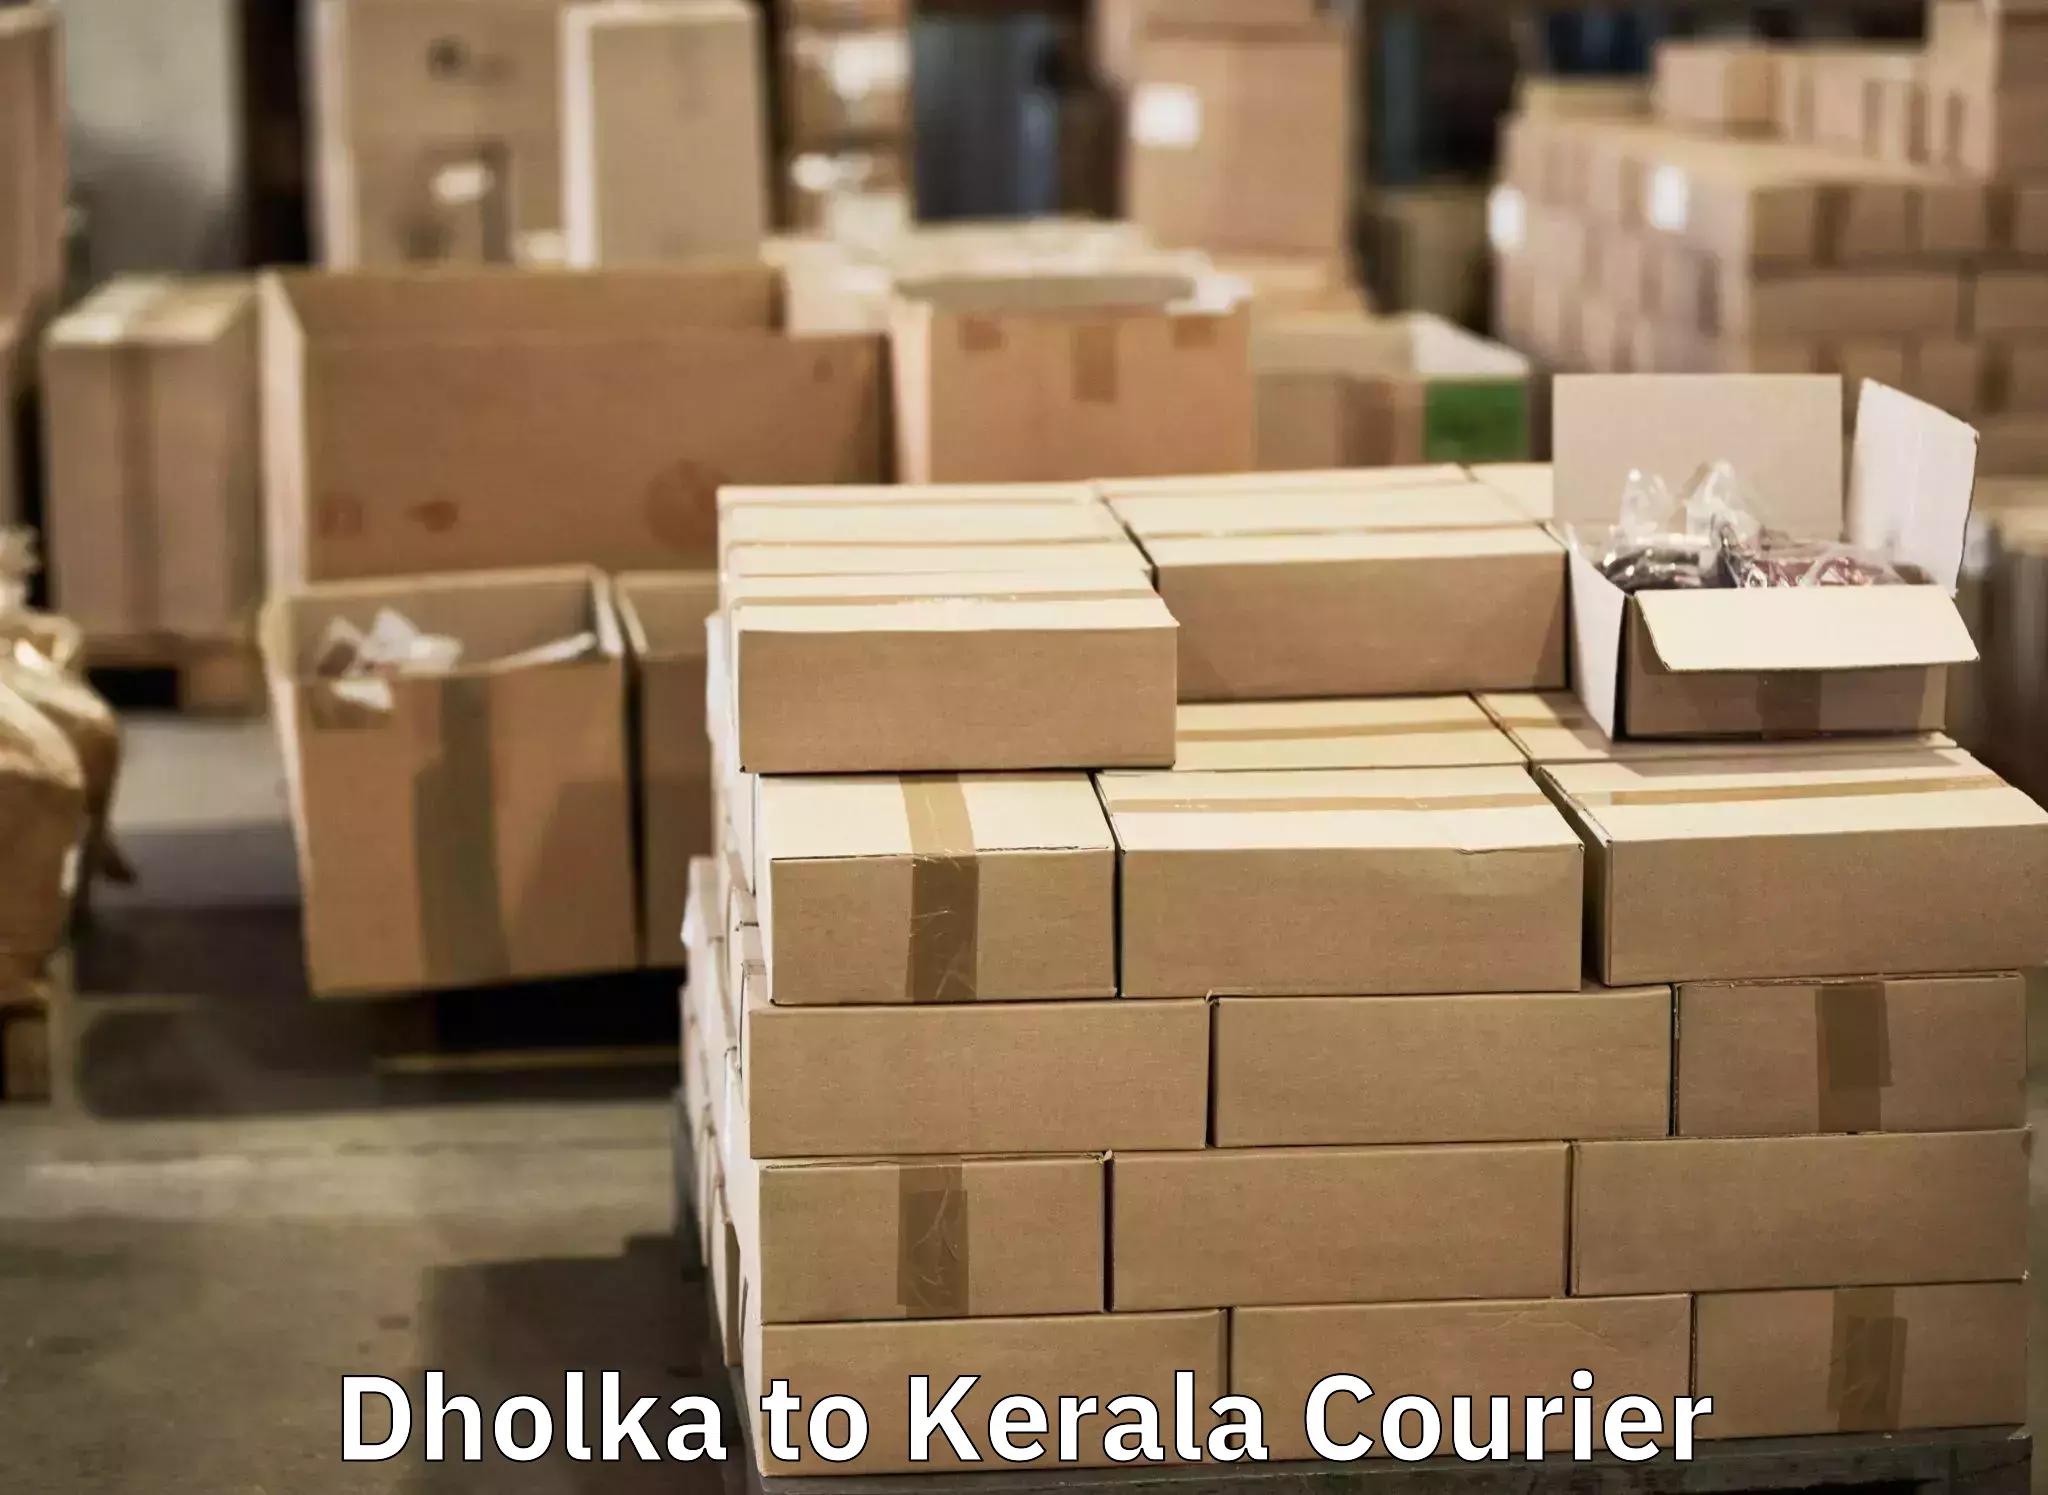 Baggage relocation service Dholka to Trivandrum